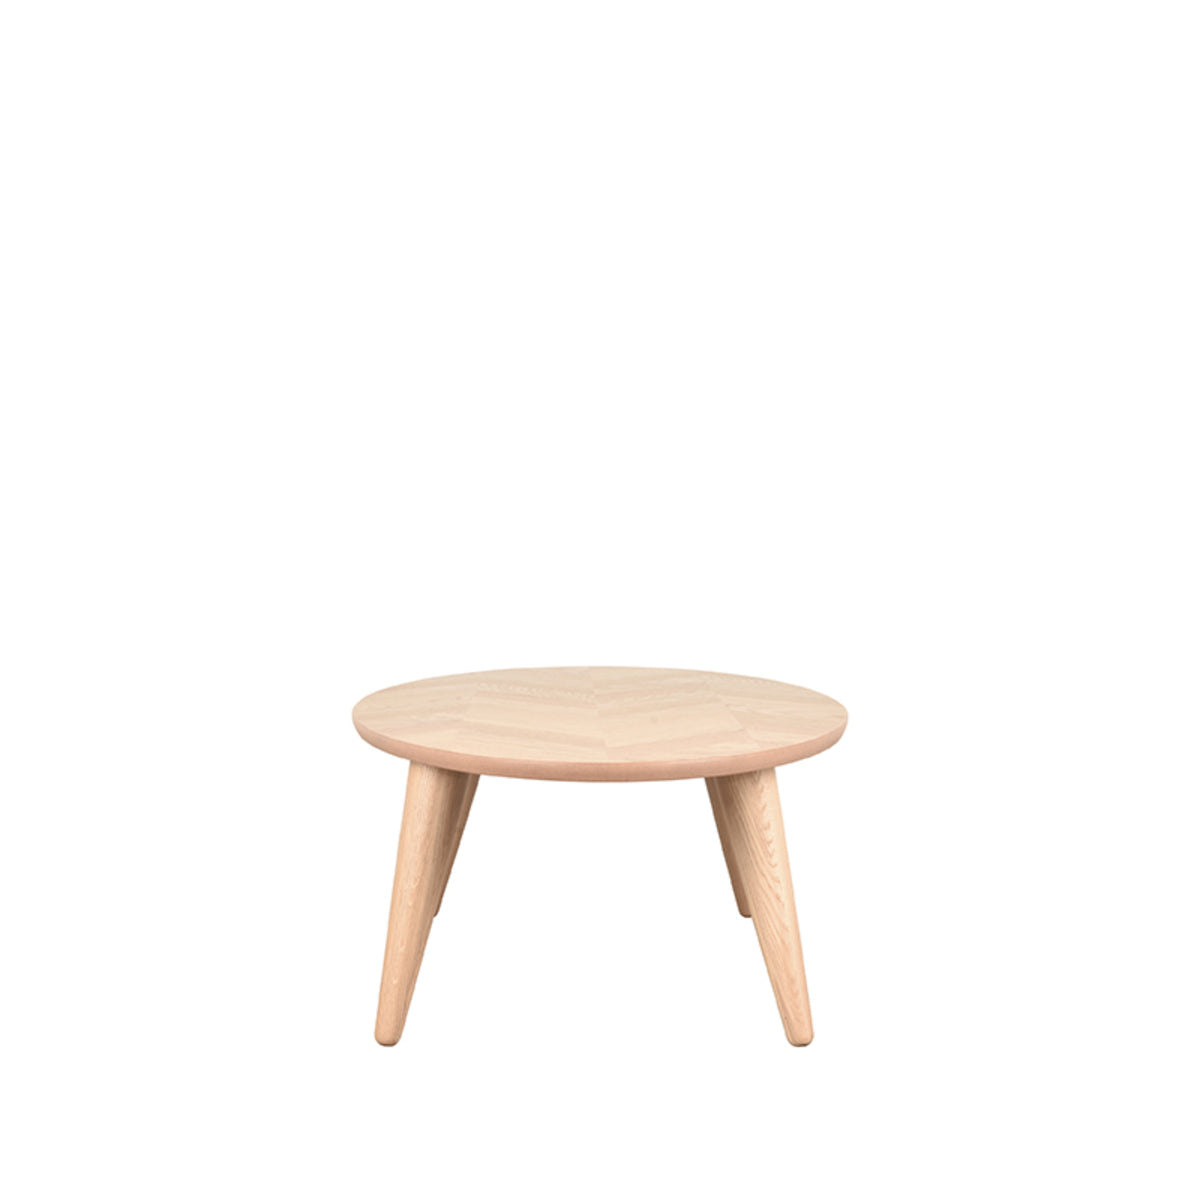 LABEL51 Coffee table Ines - Natural - Oak - 120 cm